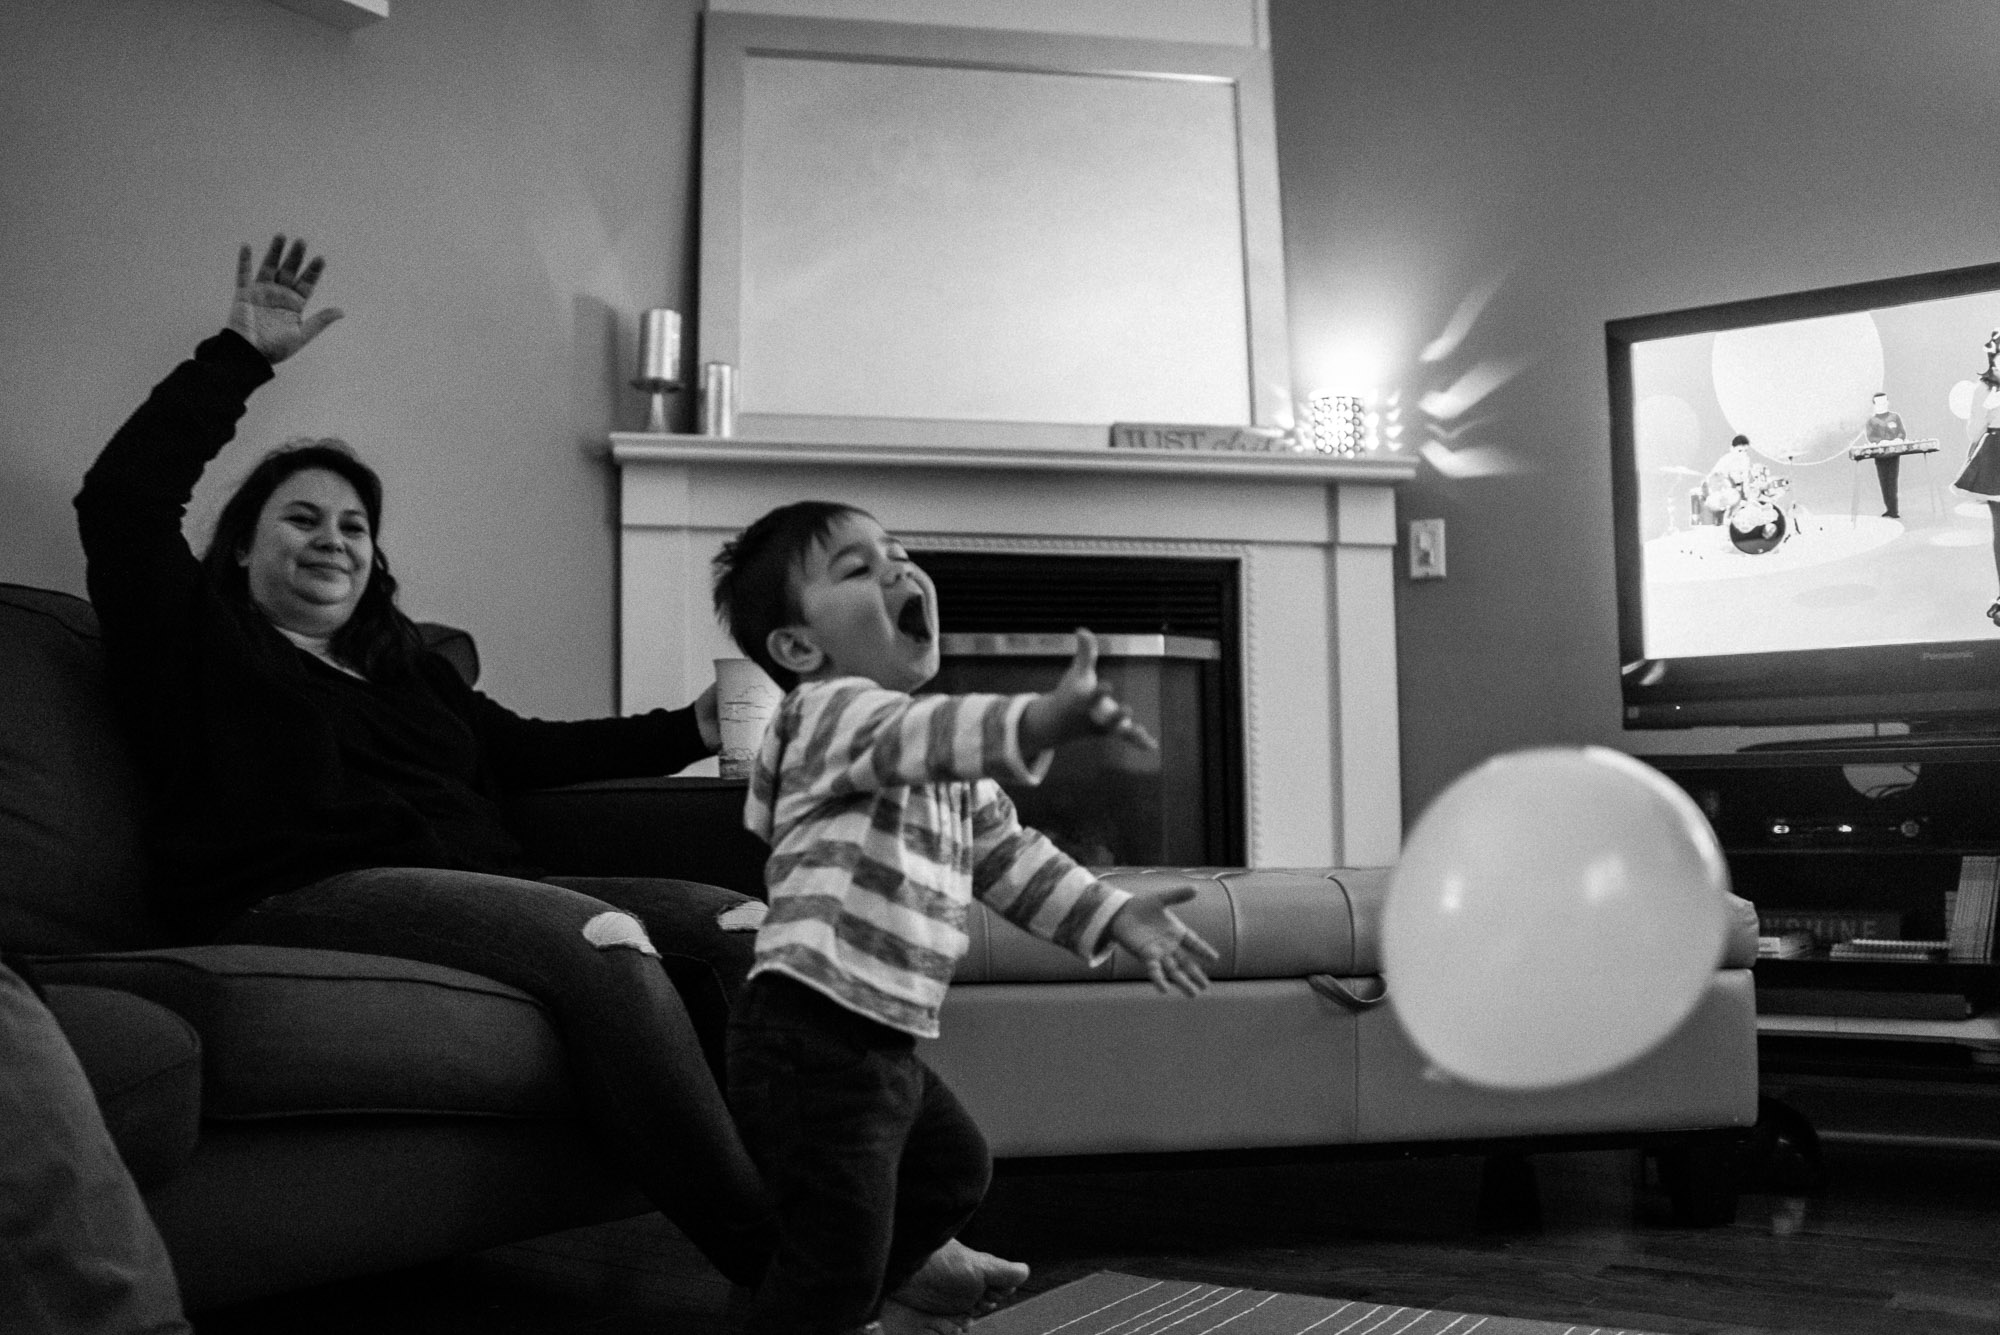 toddler in stripy shirt plays with balloon while mom looks on